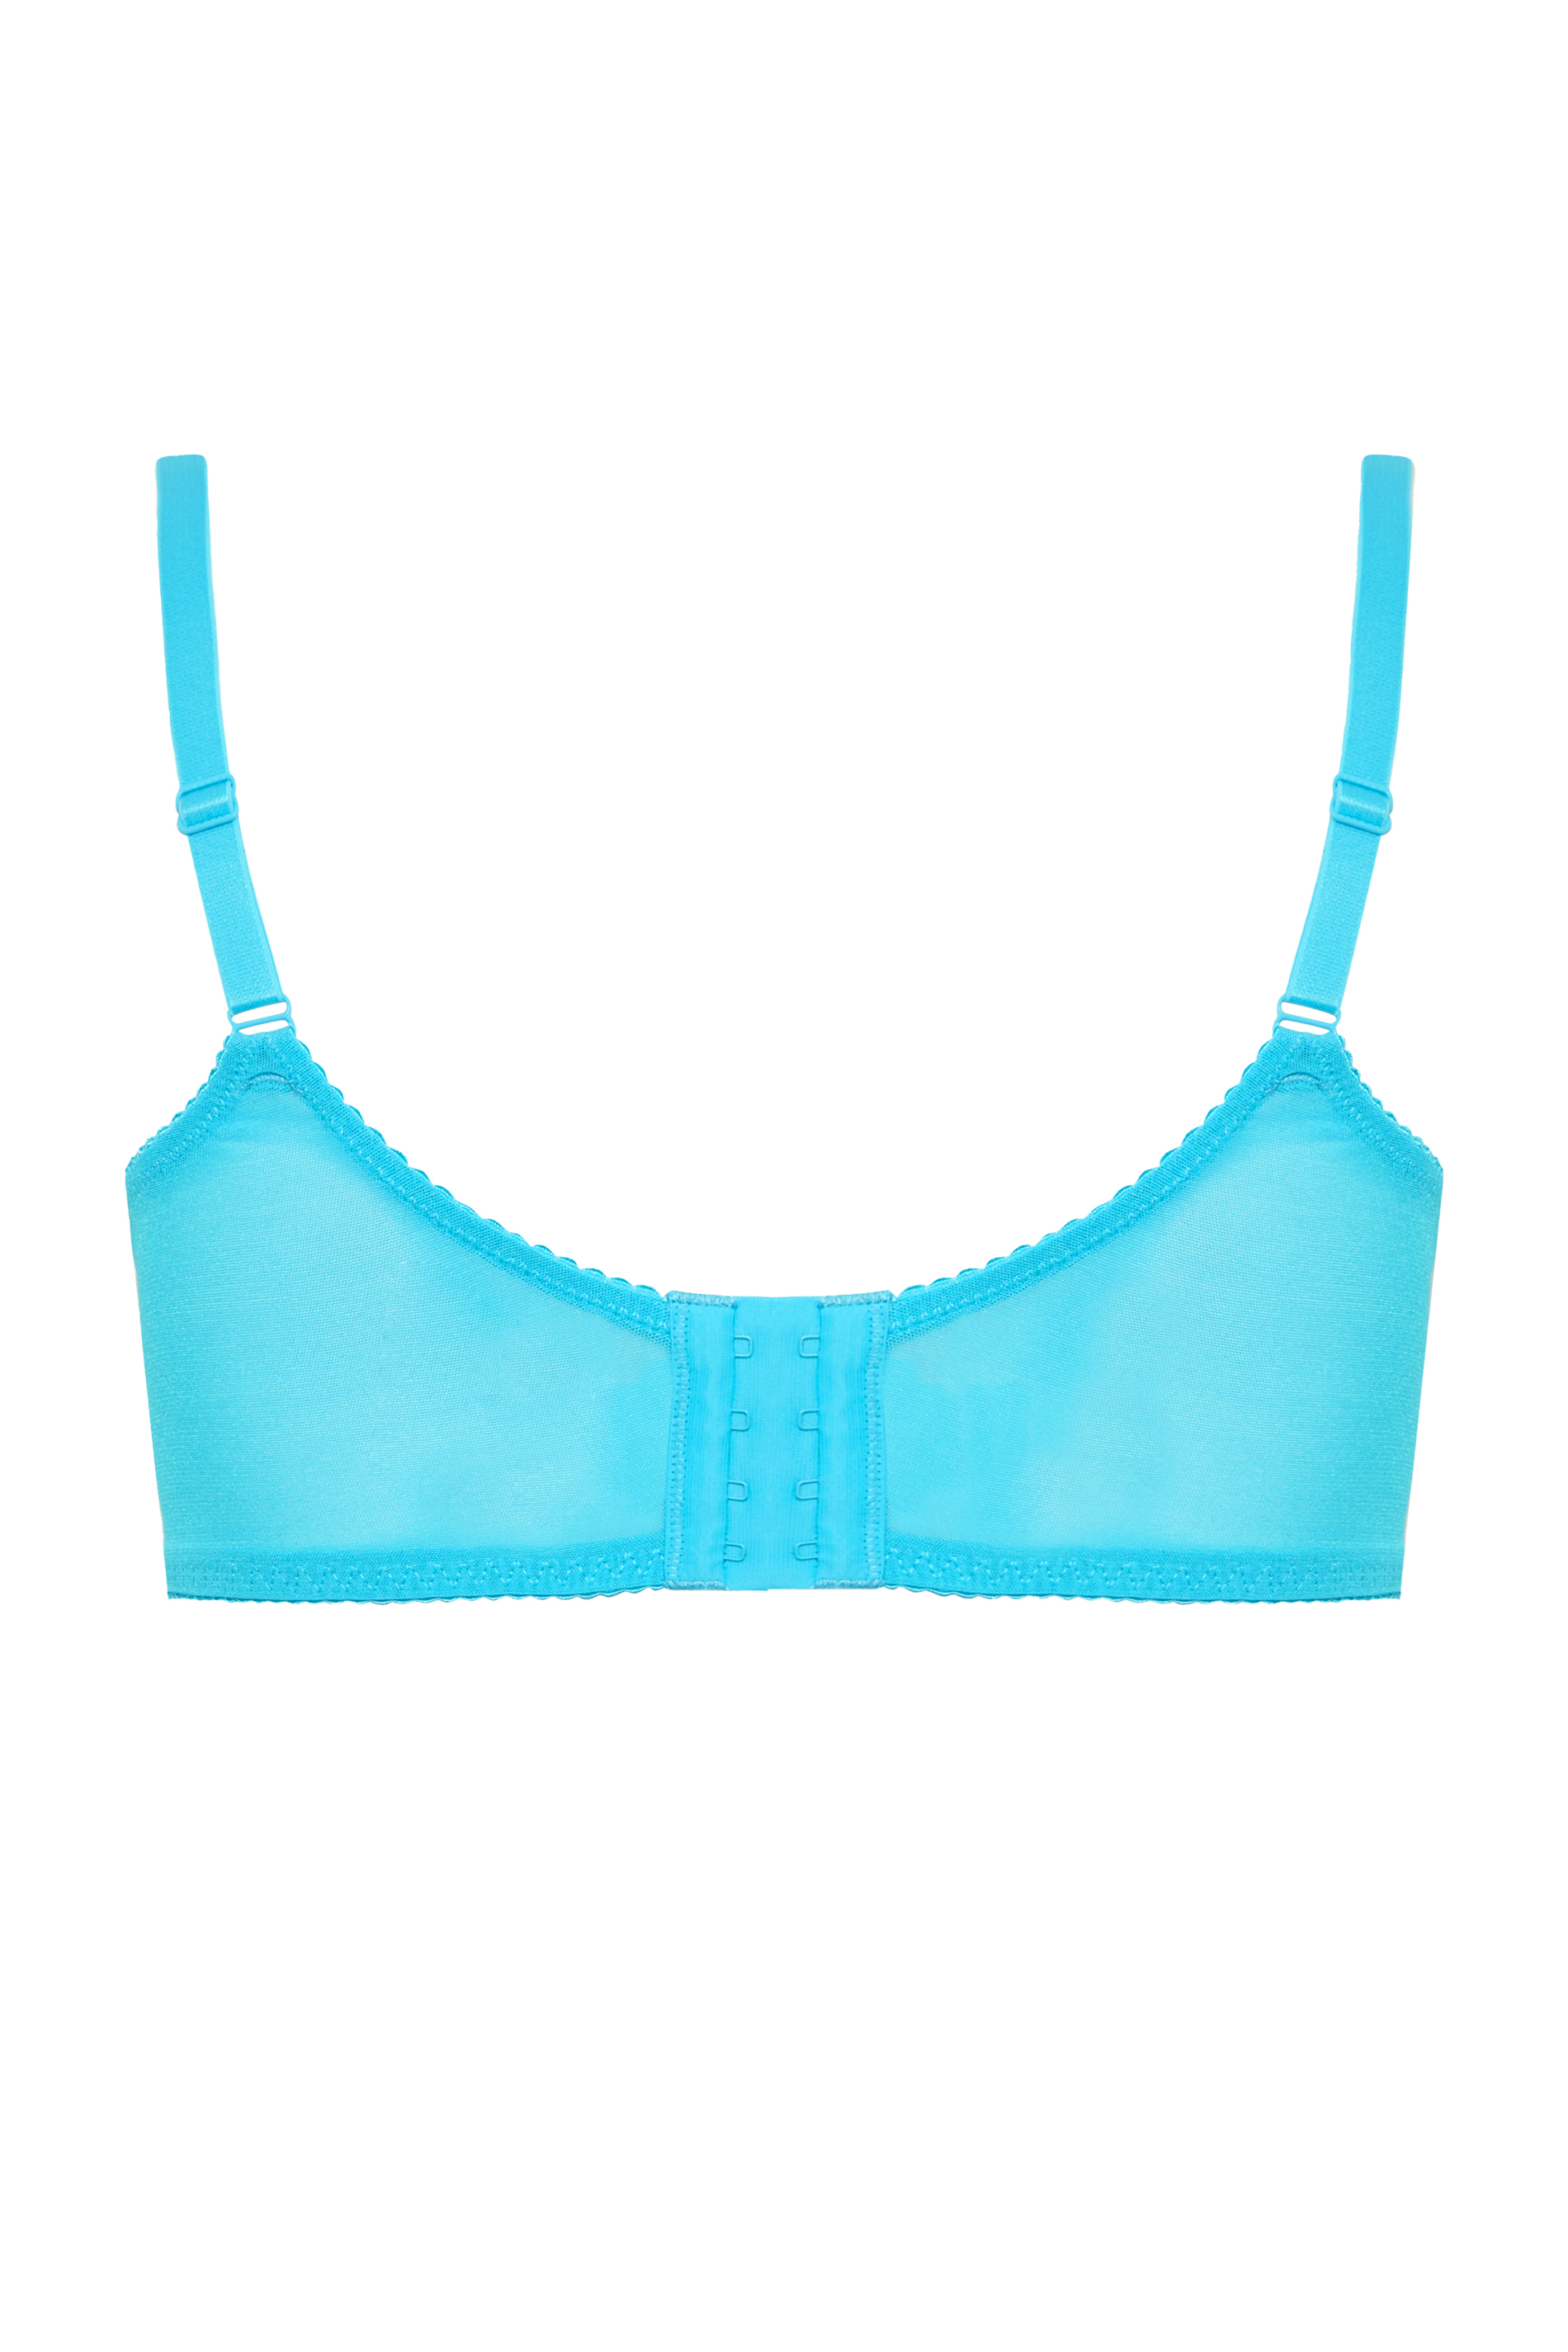 Padded underwired lace bra - Sky blue - Ladies